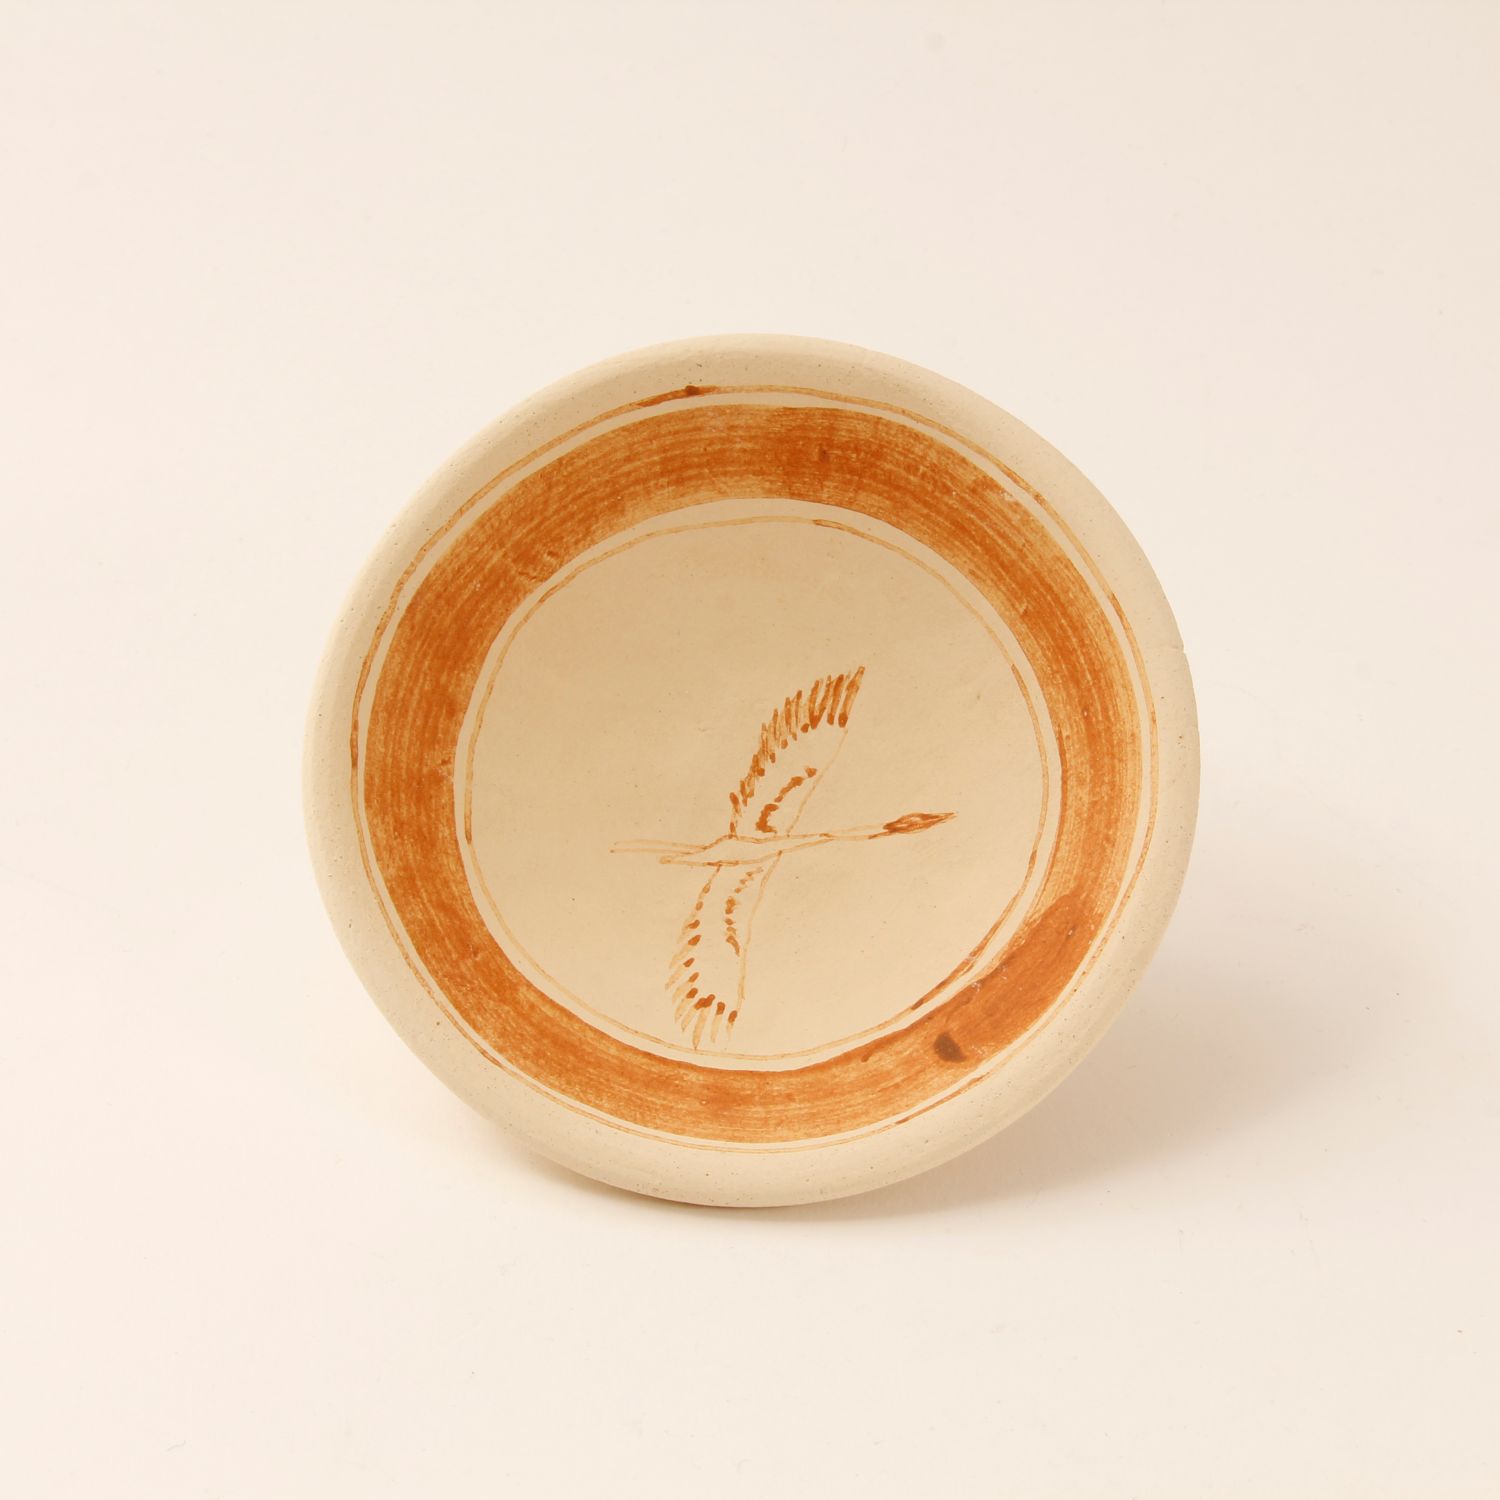 David Migwans: Assorted Heron Bowl (Each sold separately) Product Image 2 of 2